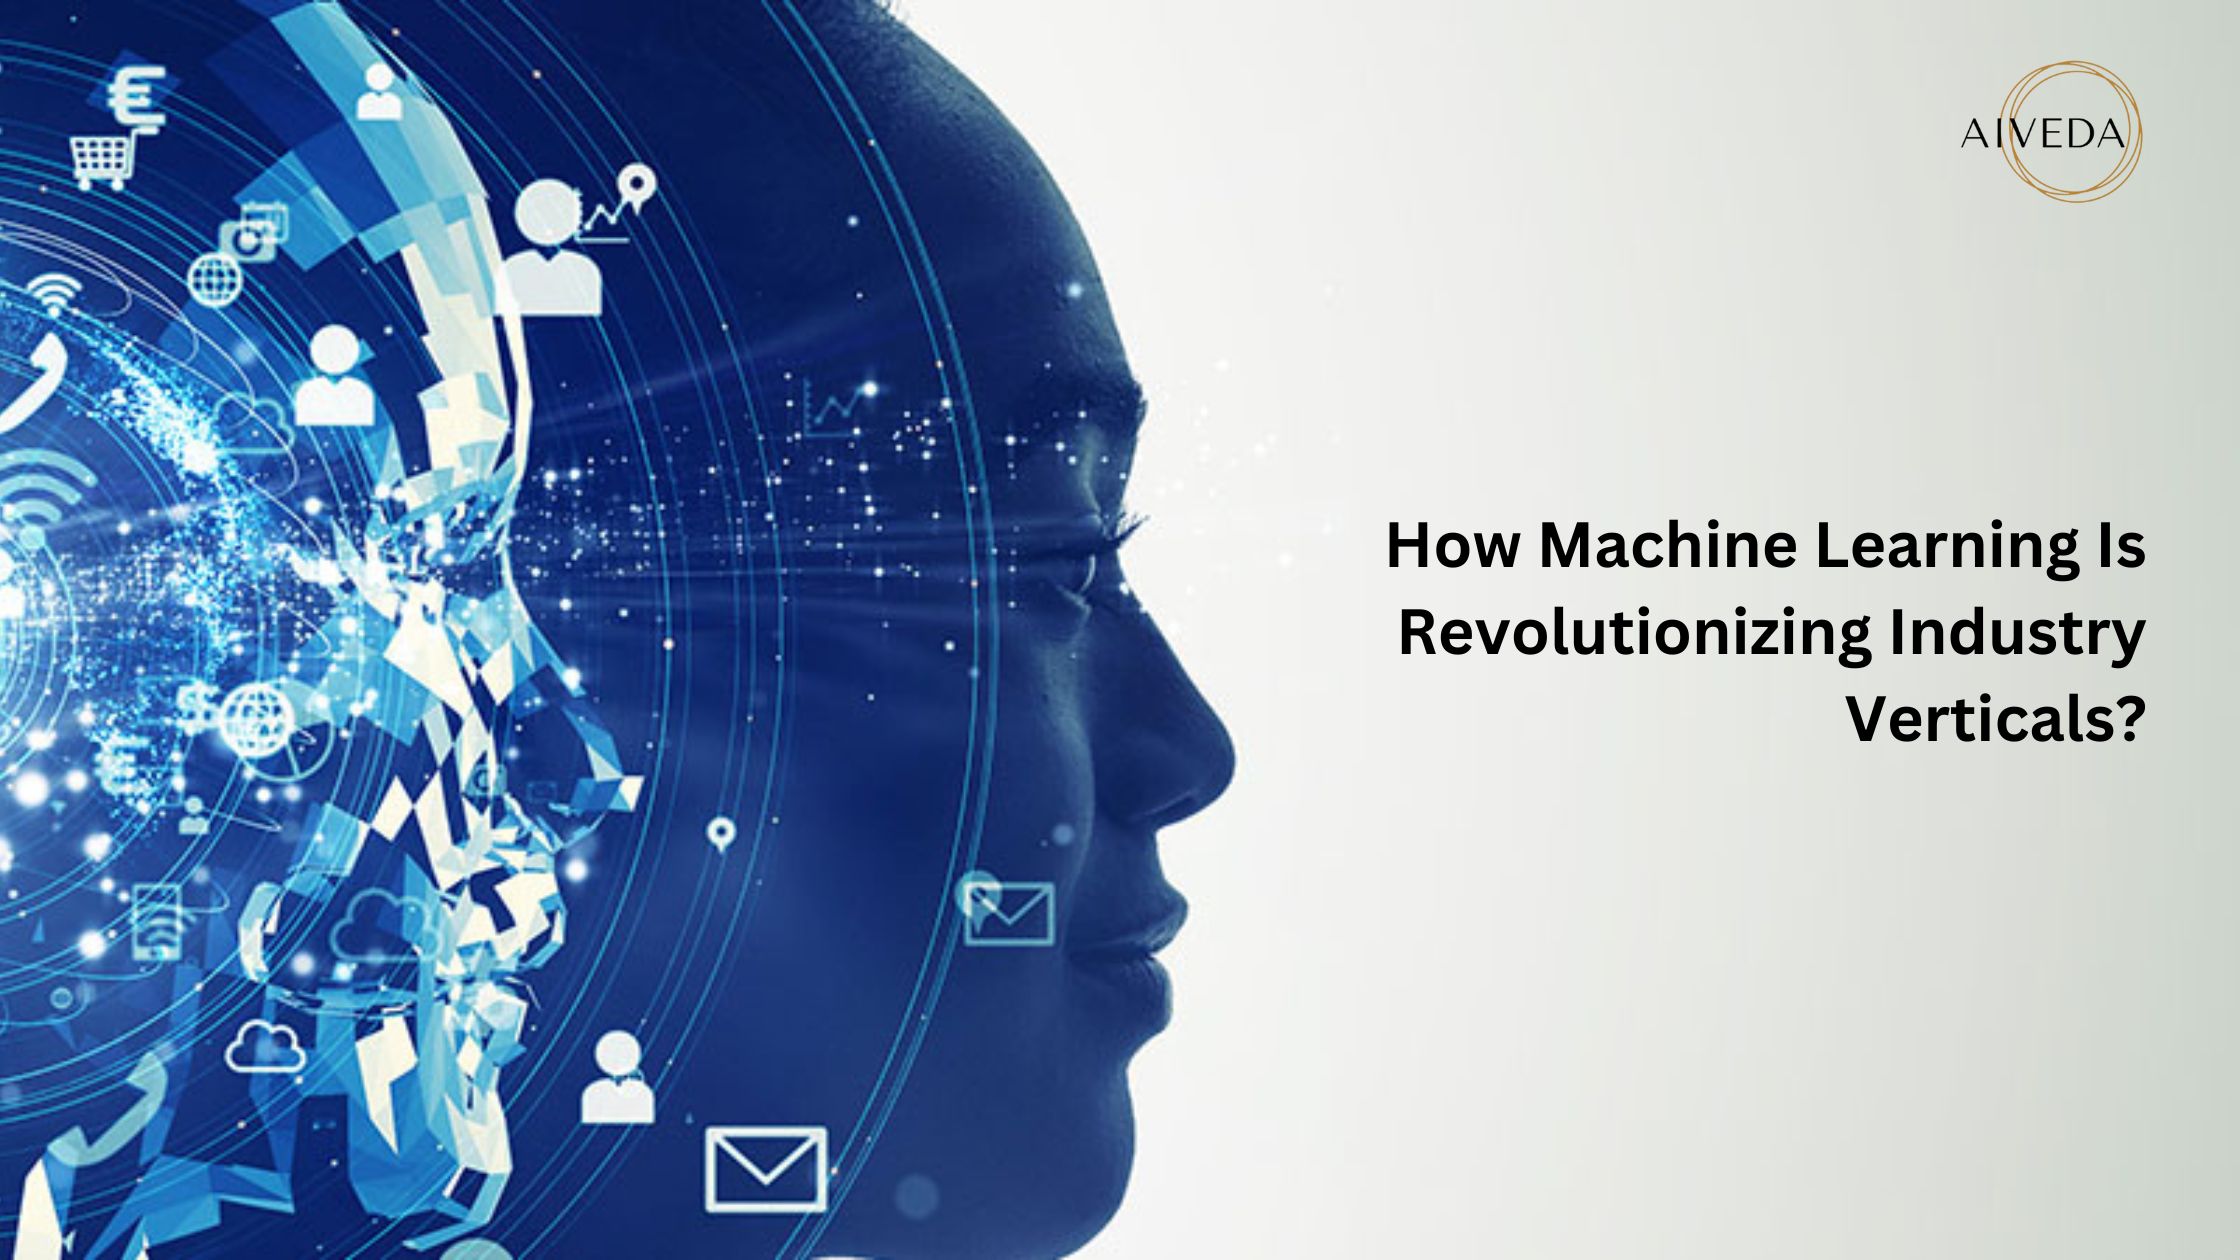 How Machine Learning Is Revolutionizing Industry Verticals?